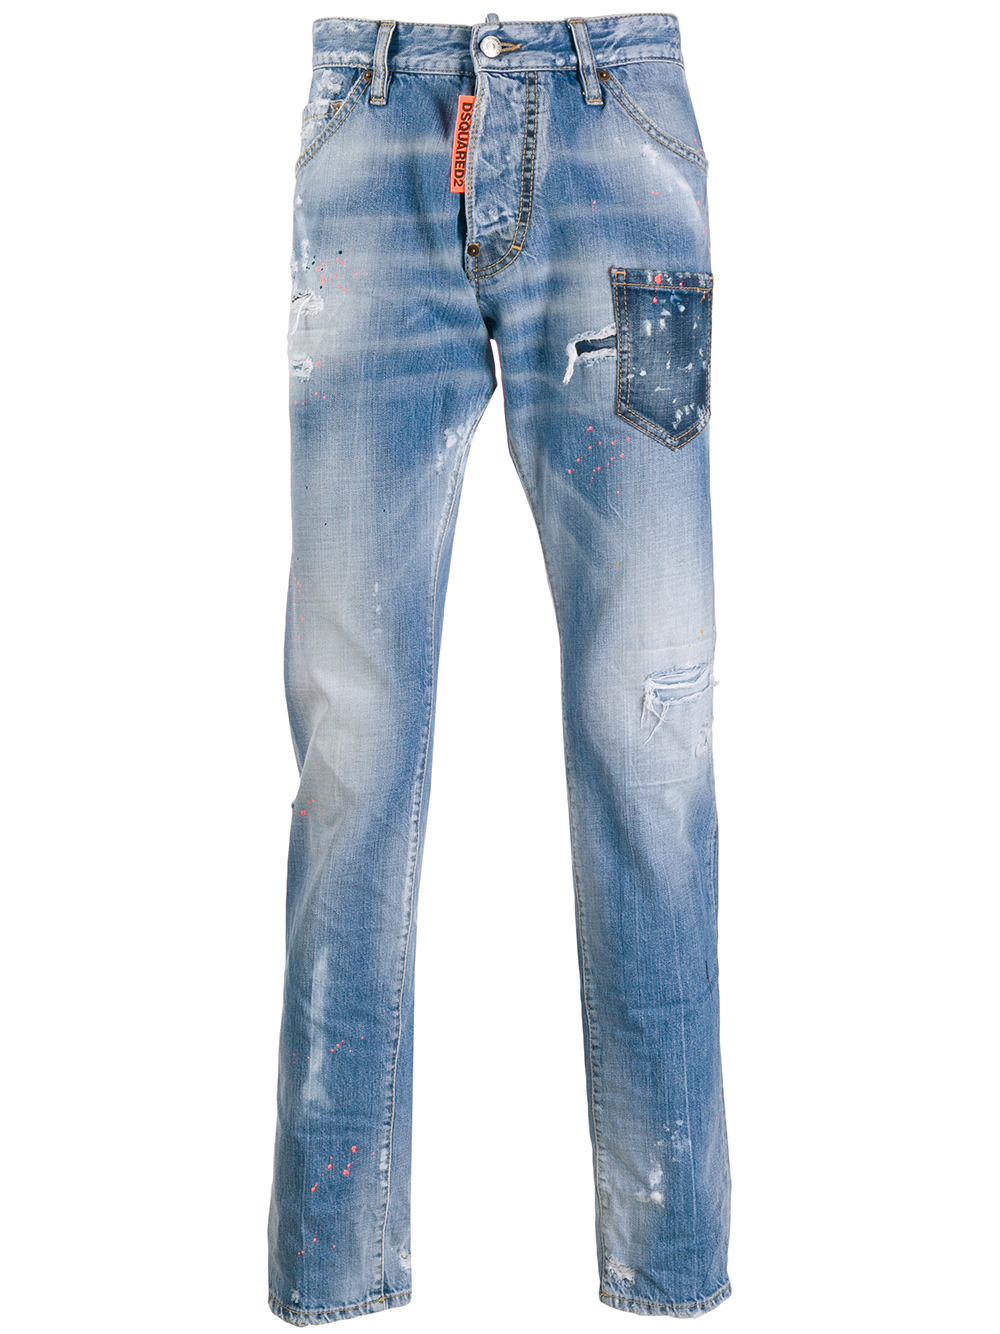 dsquared2 jeans athens